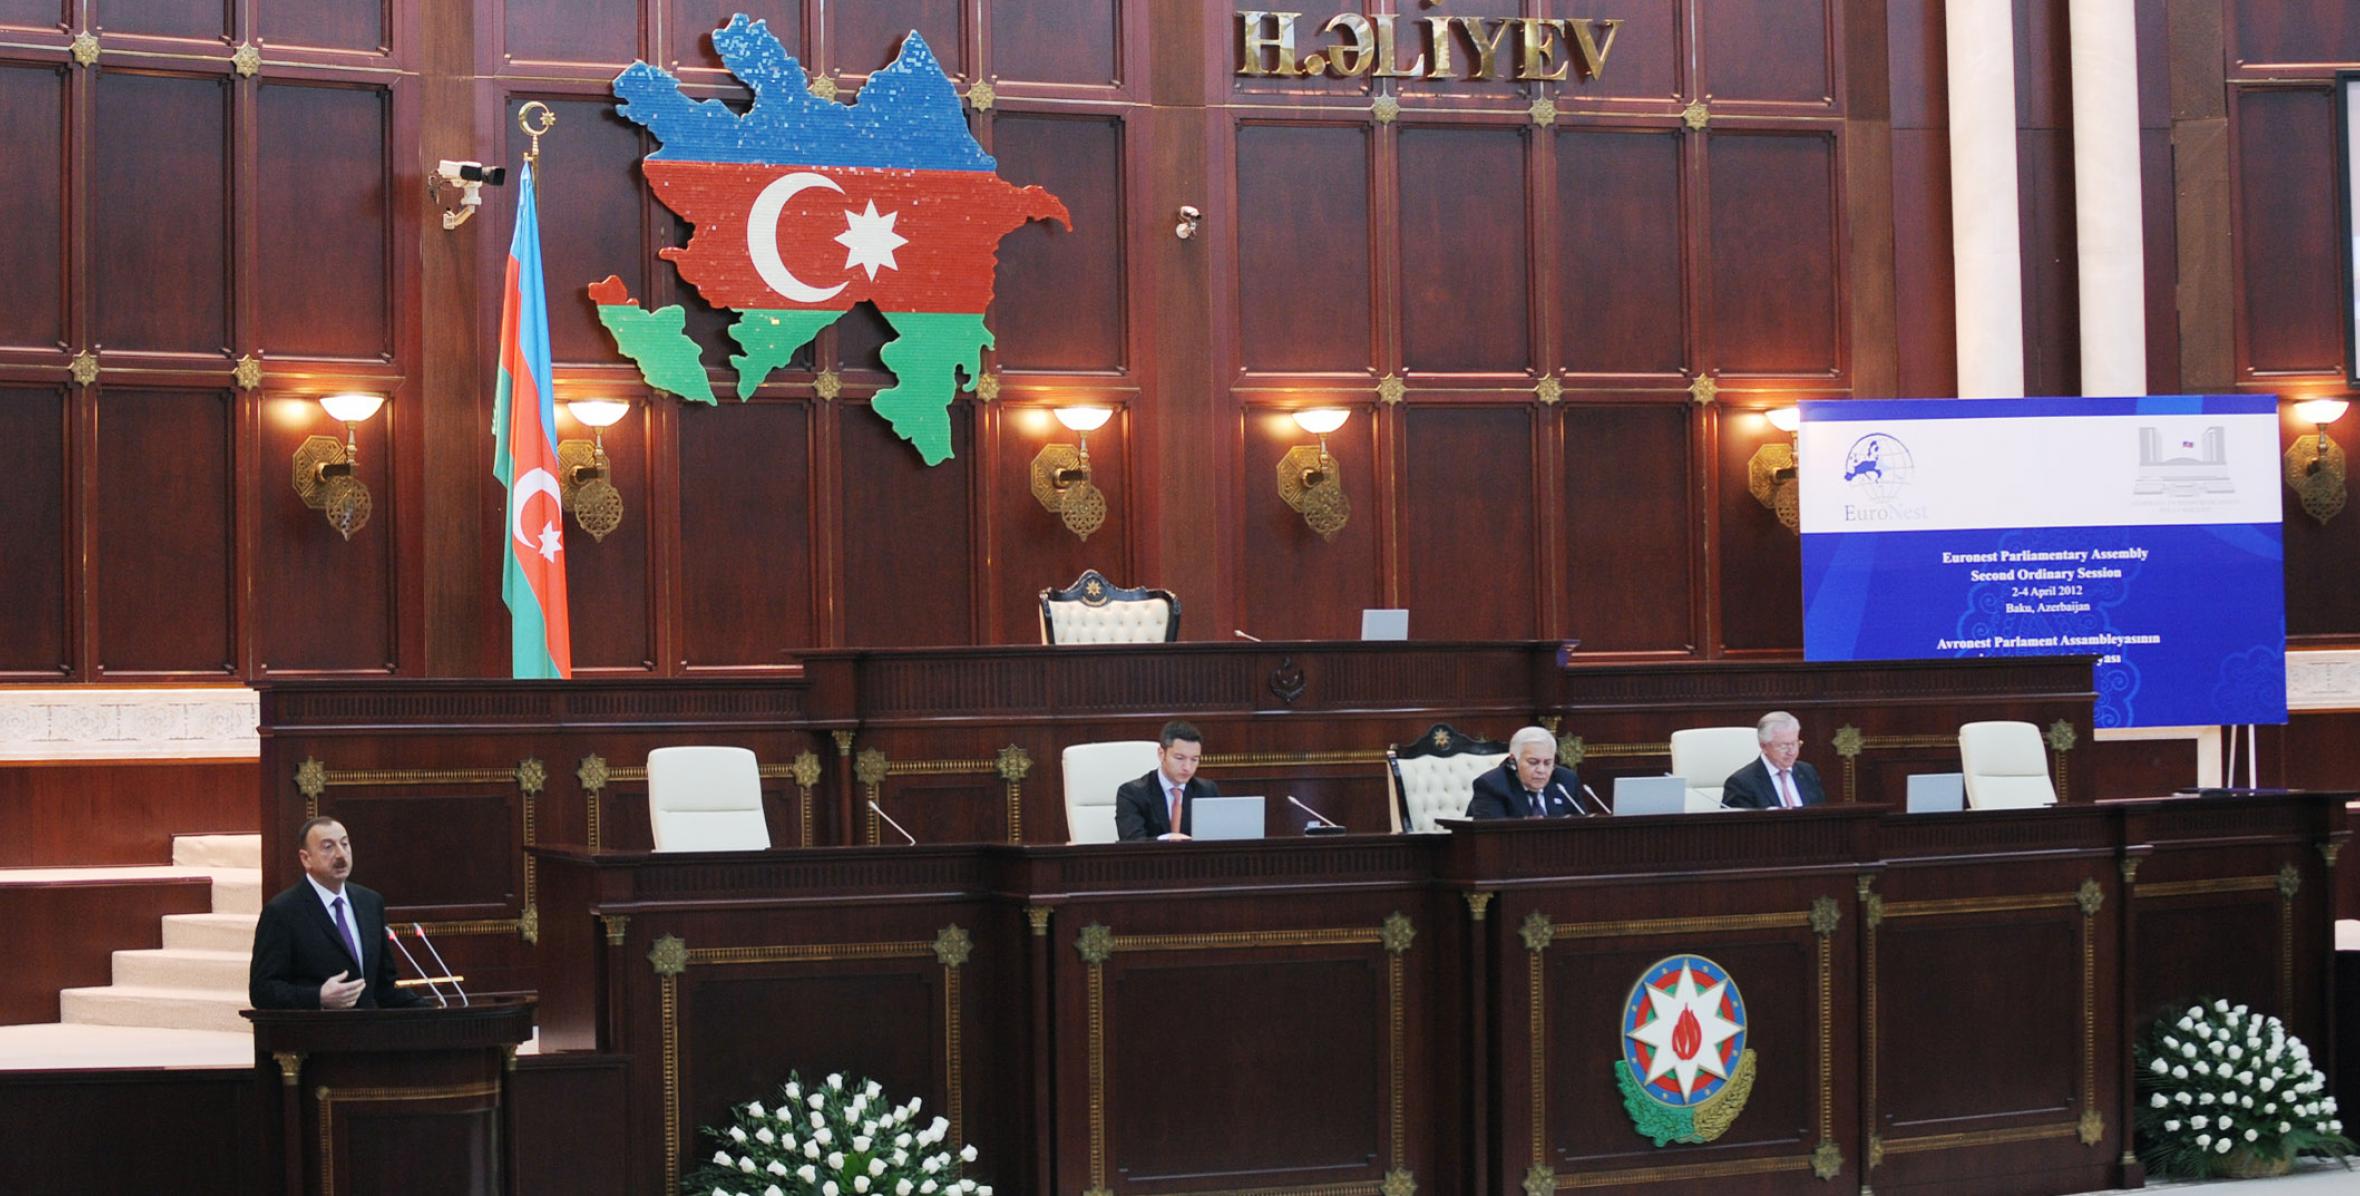 Ilham Aliyev attended the opening ceremony of the Euronest Parliamentary Assembly’s second session in Baku